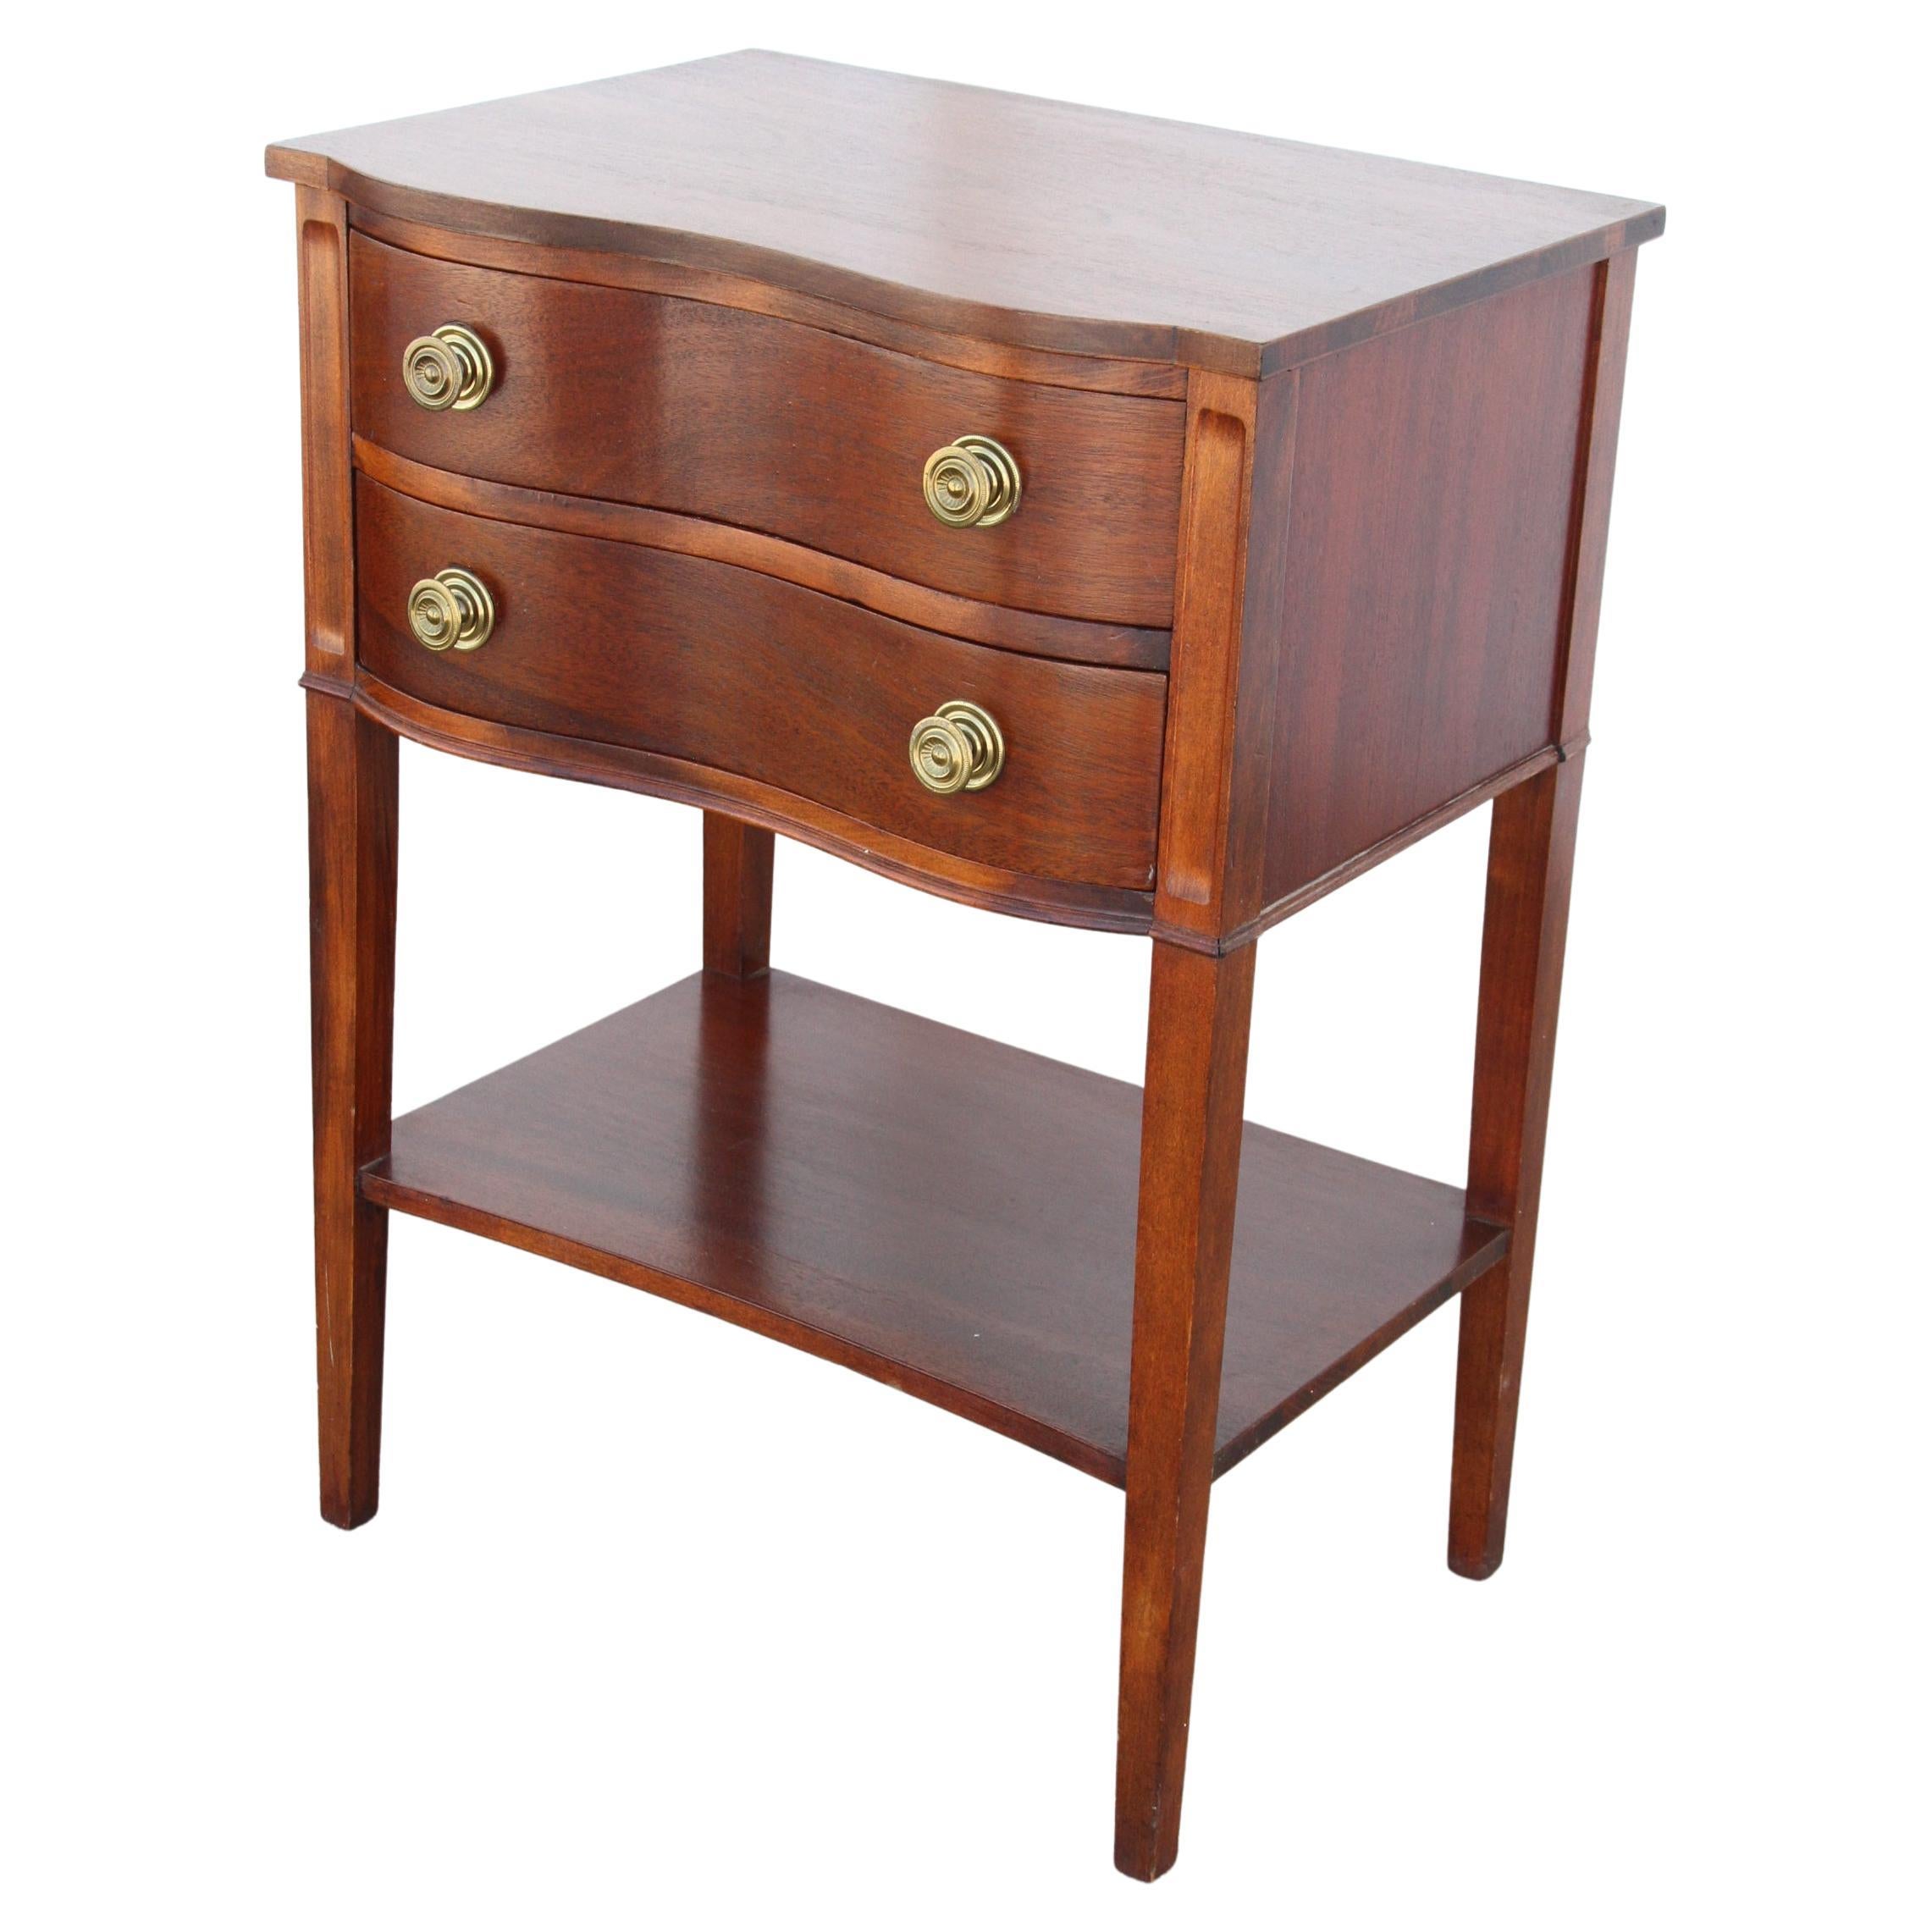 One Chippendale Mahogany Serpentine Front 2-Drawer Side Table For Sale